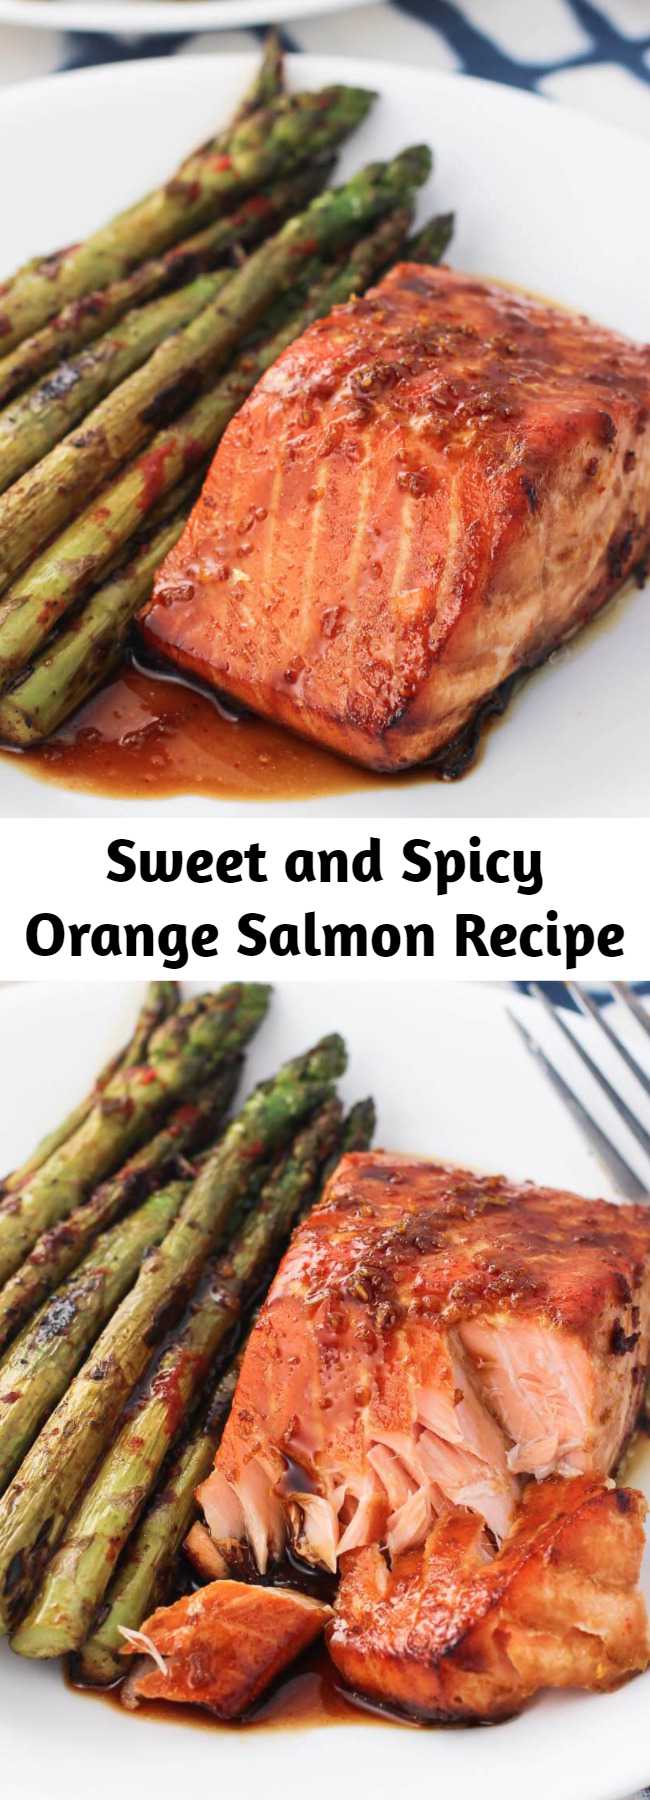 Sweet and Spicy Orange Salmon Recipe - Today I’m excited to share one of my recent favorite dinners - sweet and spicy orange salmon. It's a healthy dinner idea that is quick and easy.